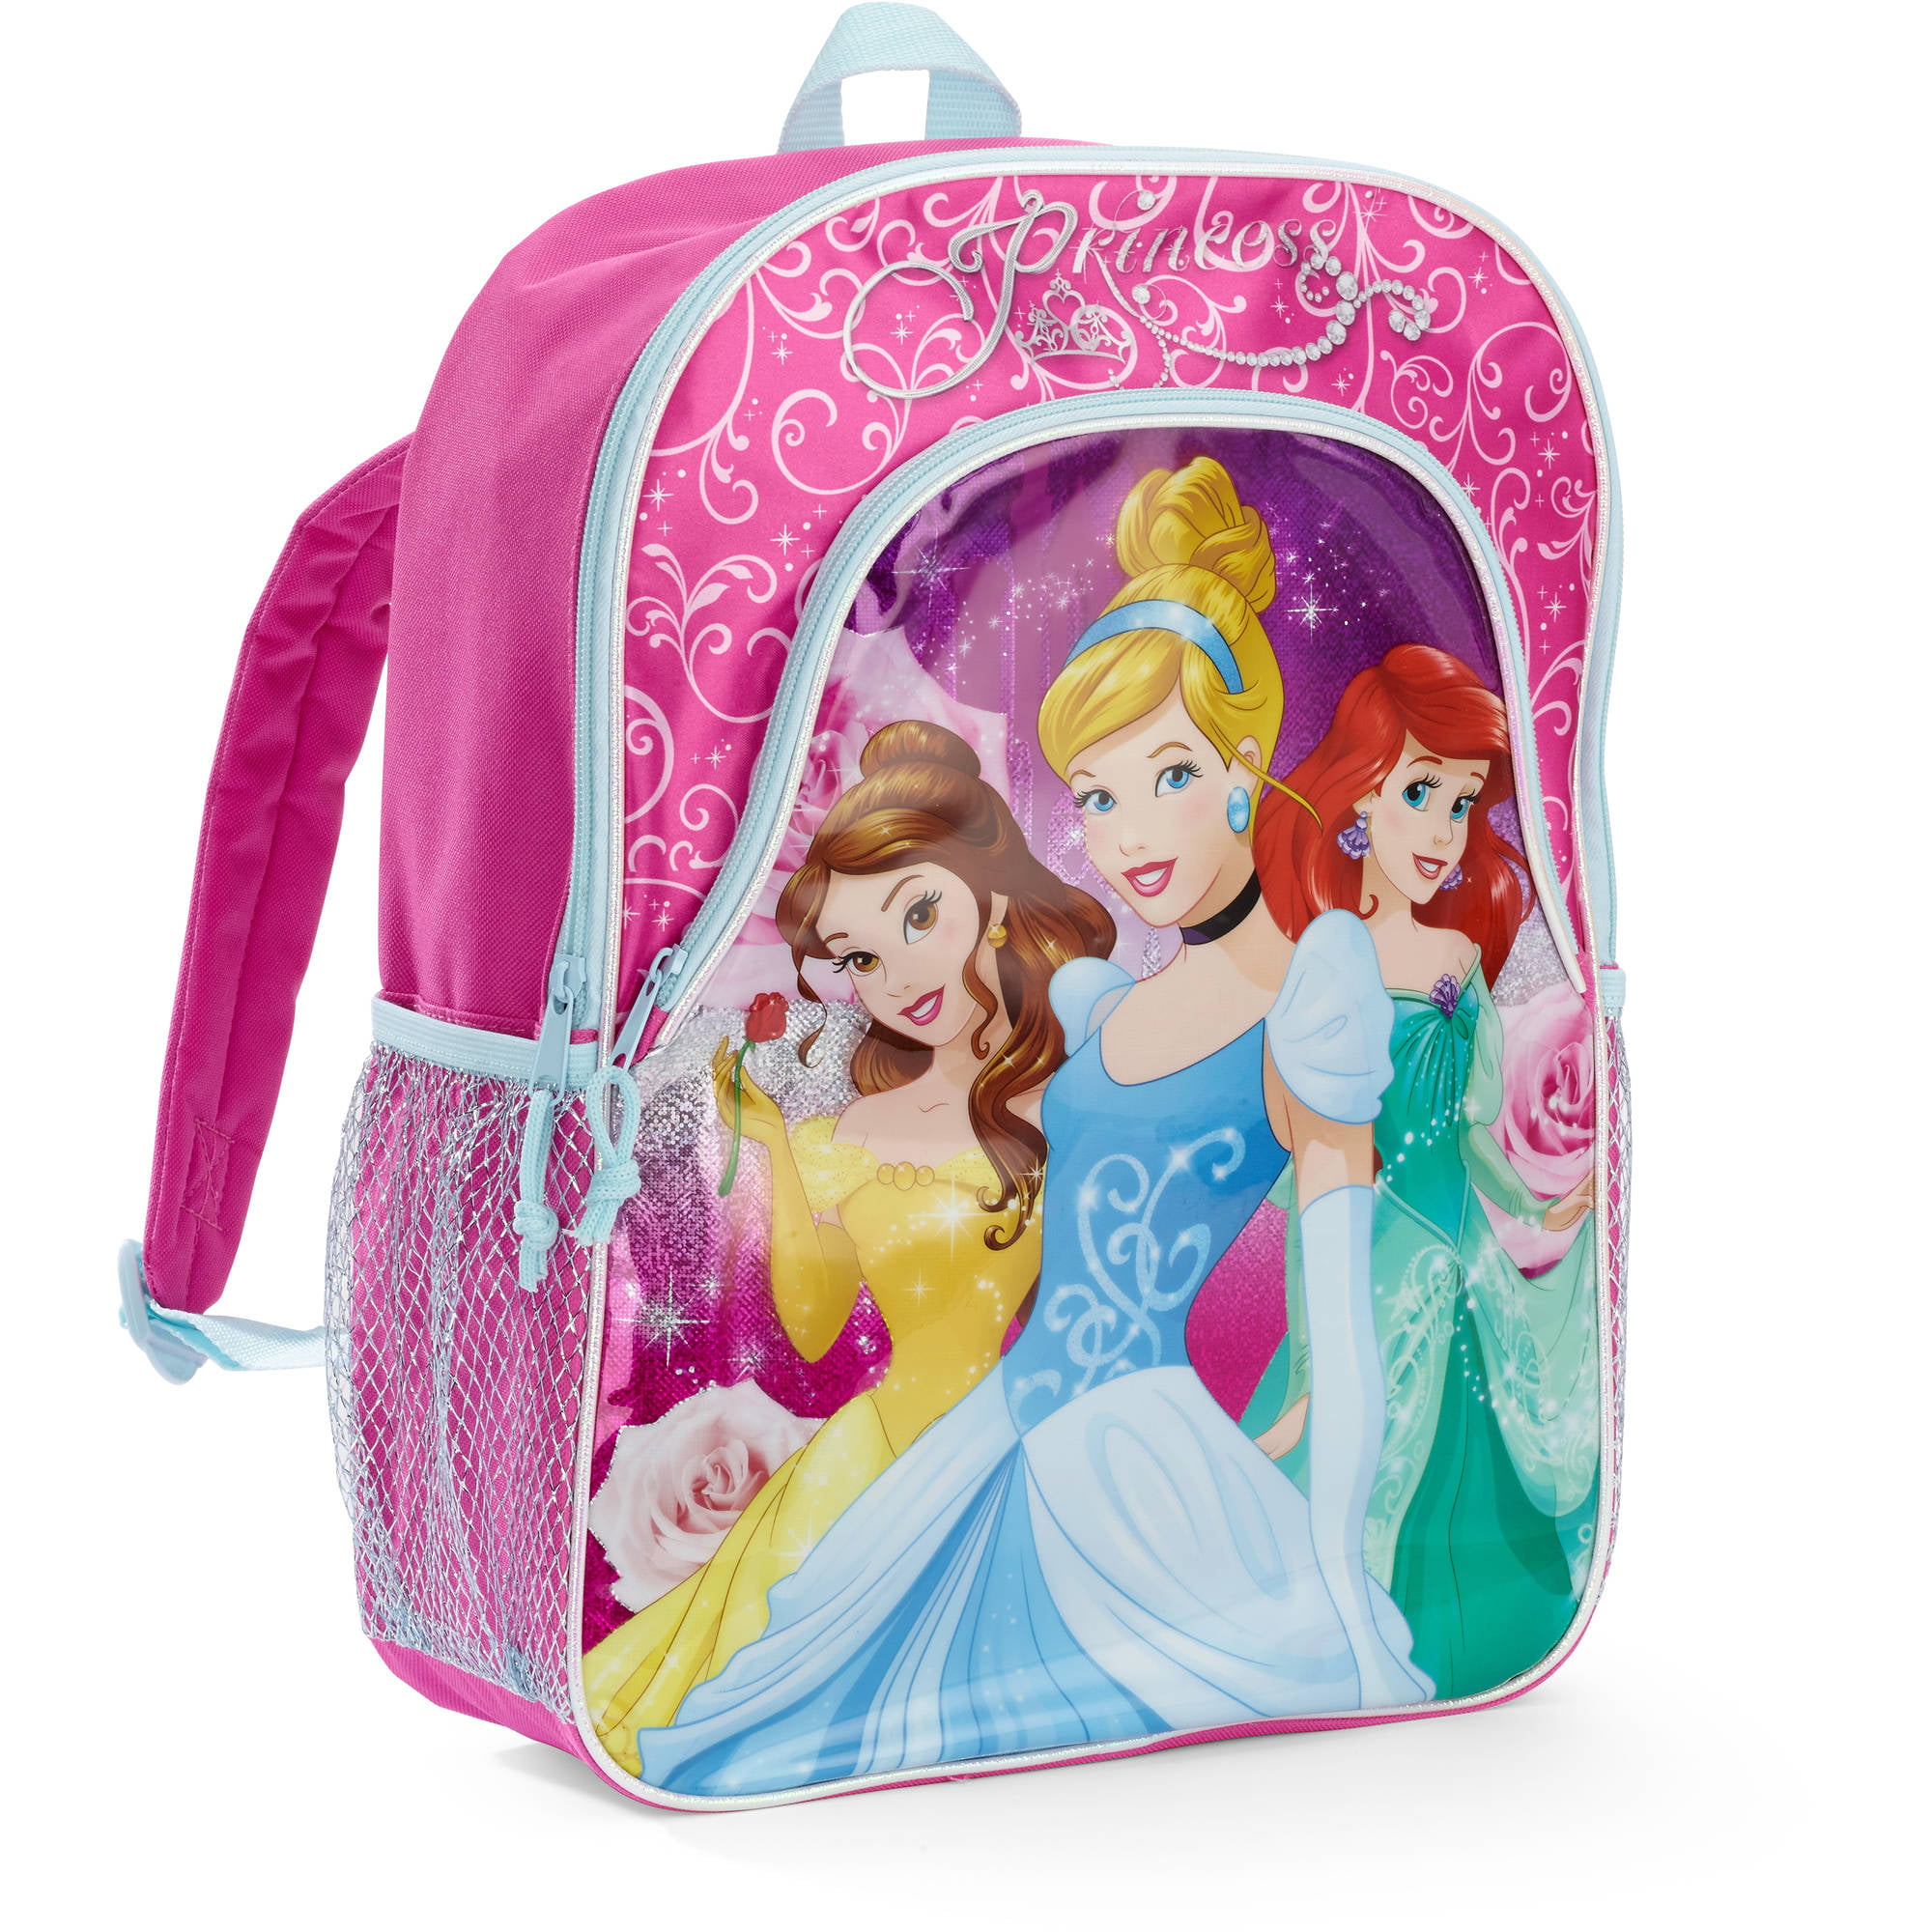 Disney Princess 4 Piece Backpack Set, Flip Sequin School Bag for Girls with  Front Zip Pocket, Foam Mesh Side Pockets, Insulated Lunch Box, Water  Bottle, & Squish Ball Dangle, Pink 